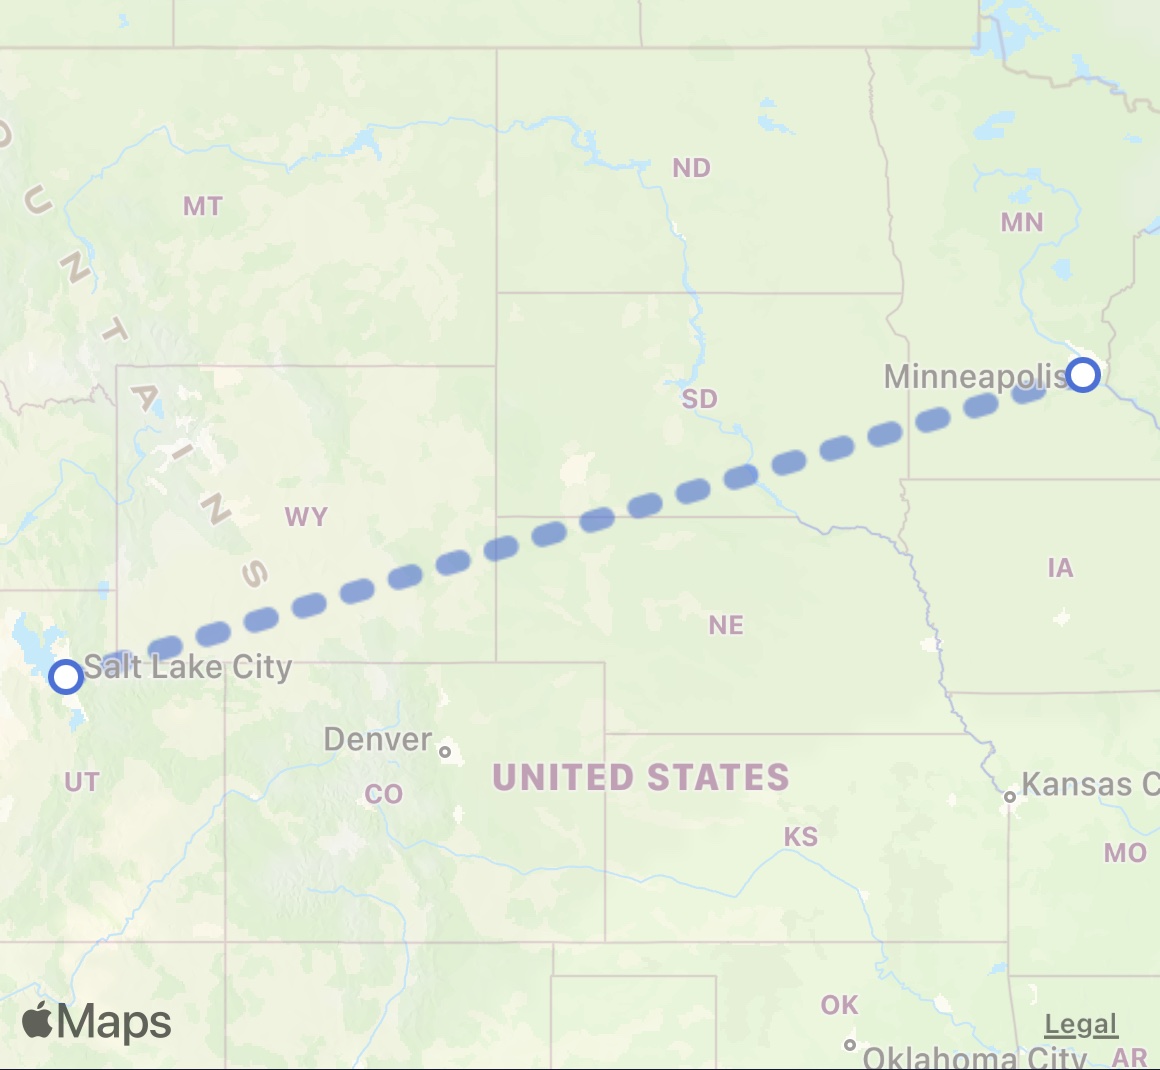 Flight Route MSP to SLC